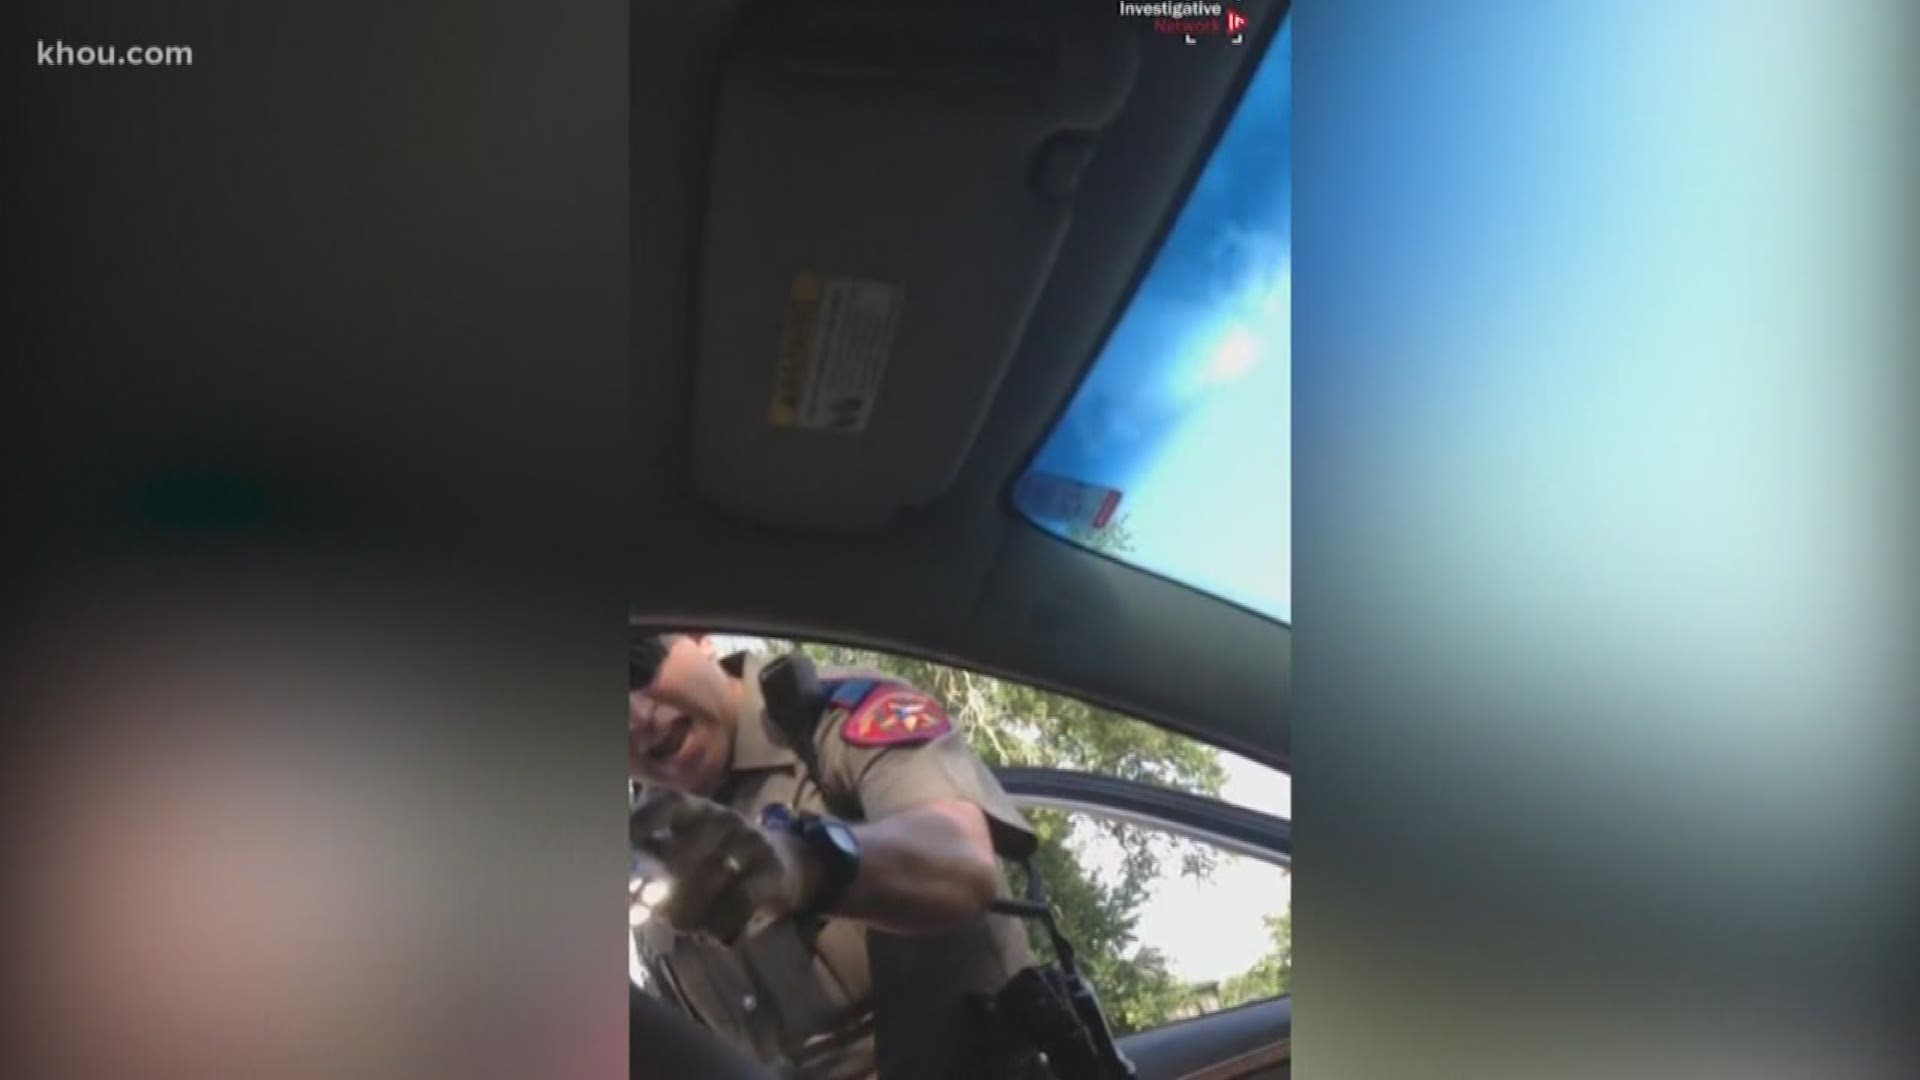 new video has surfaced from Sandra Bland's cellphone showing her arrest from her perspective.